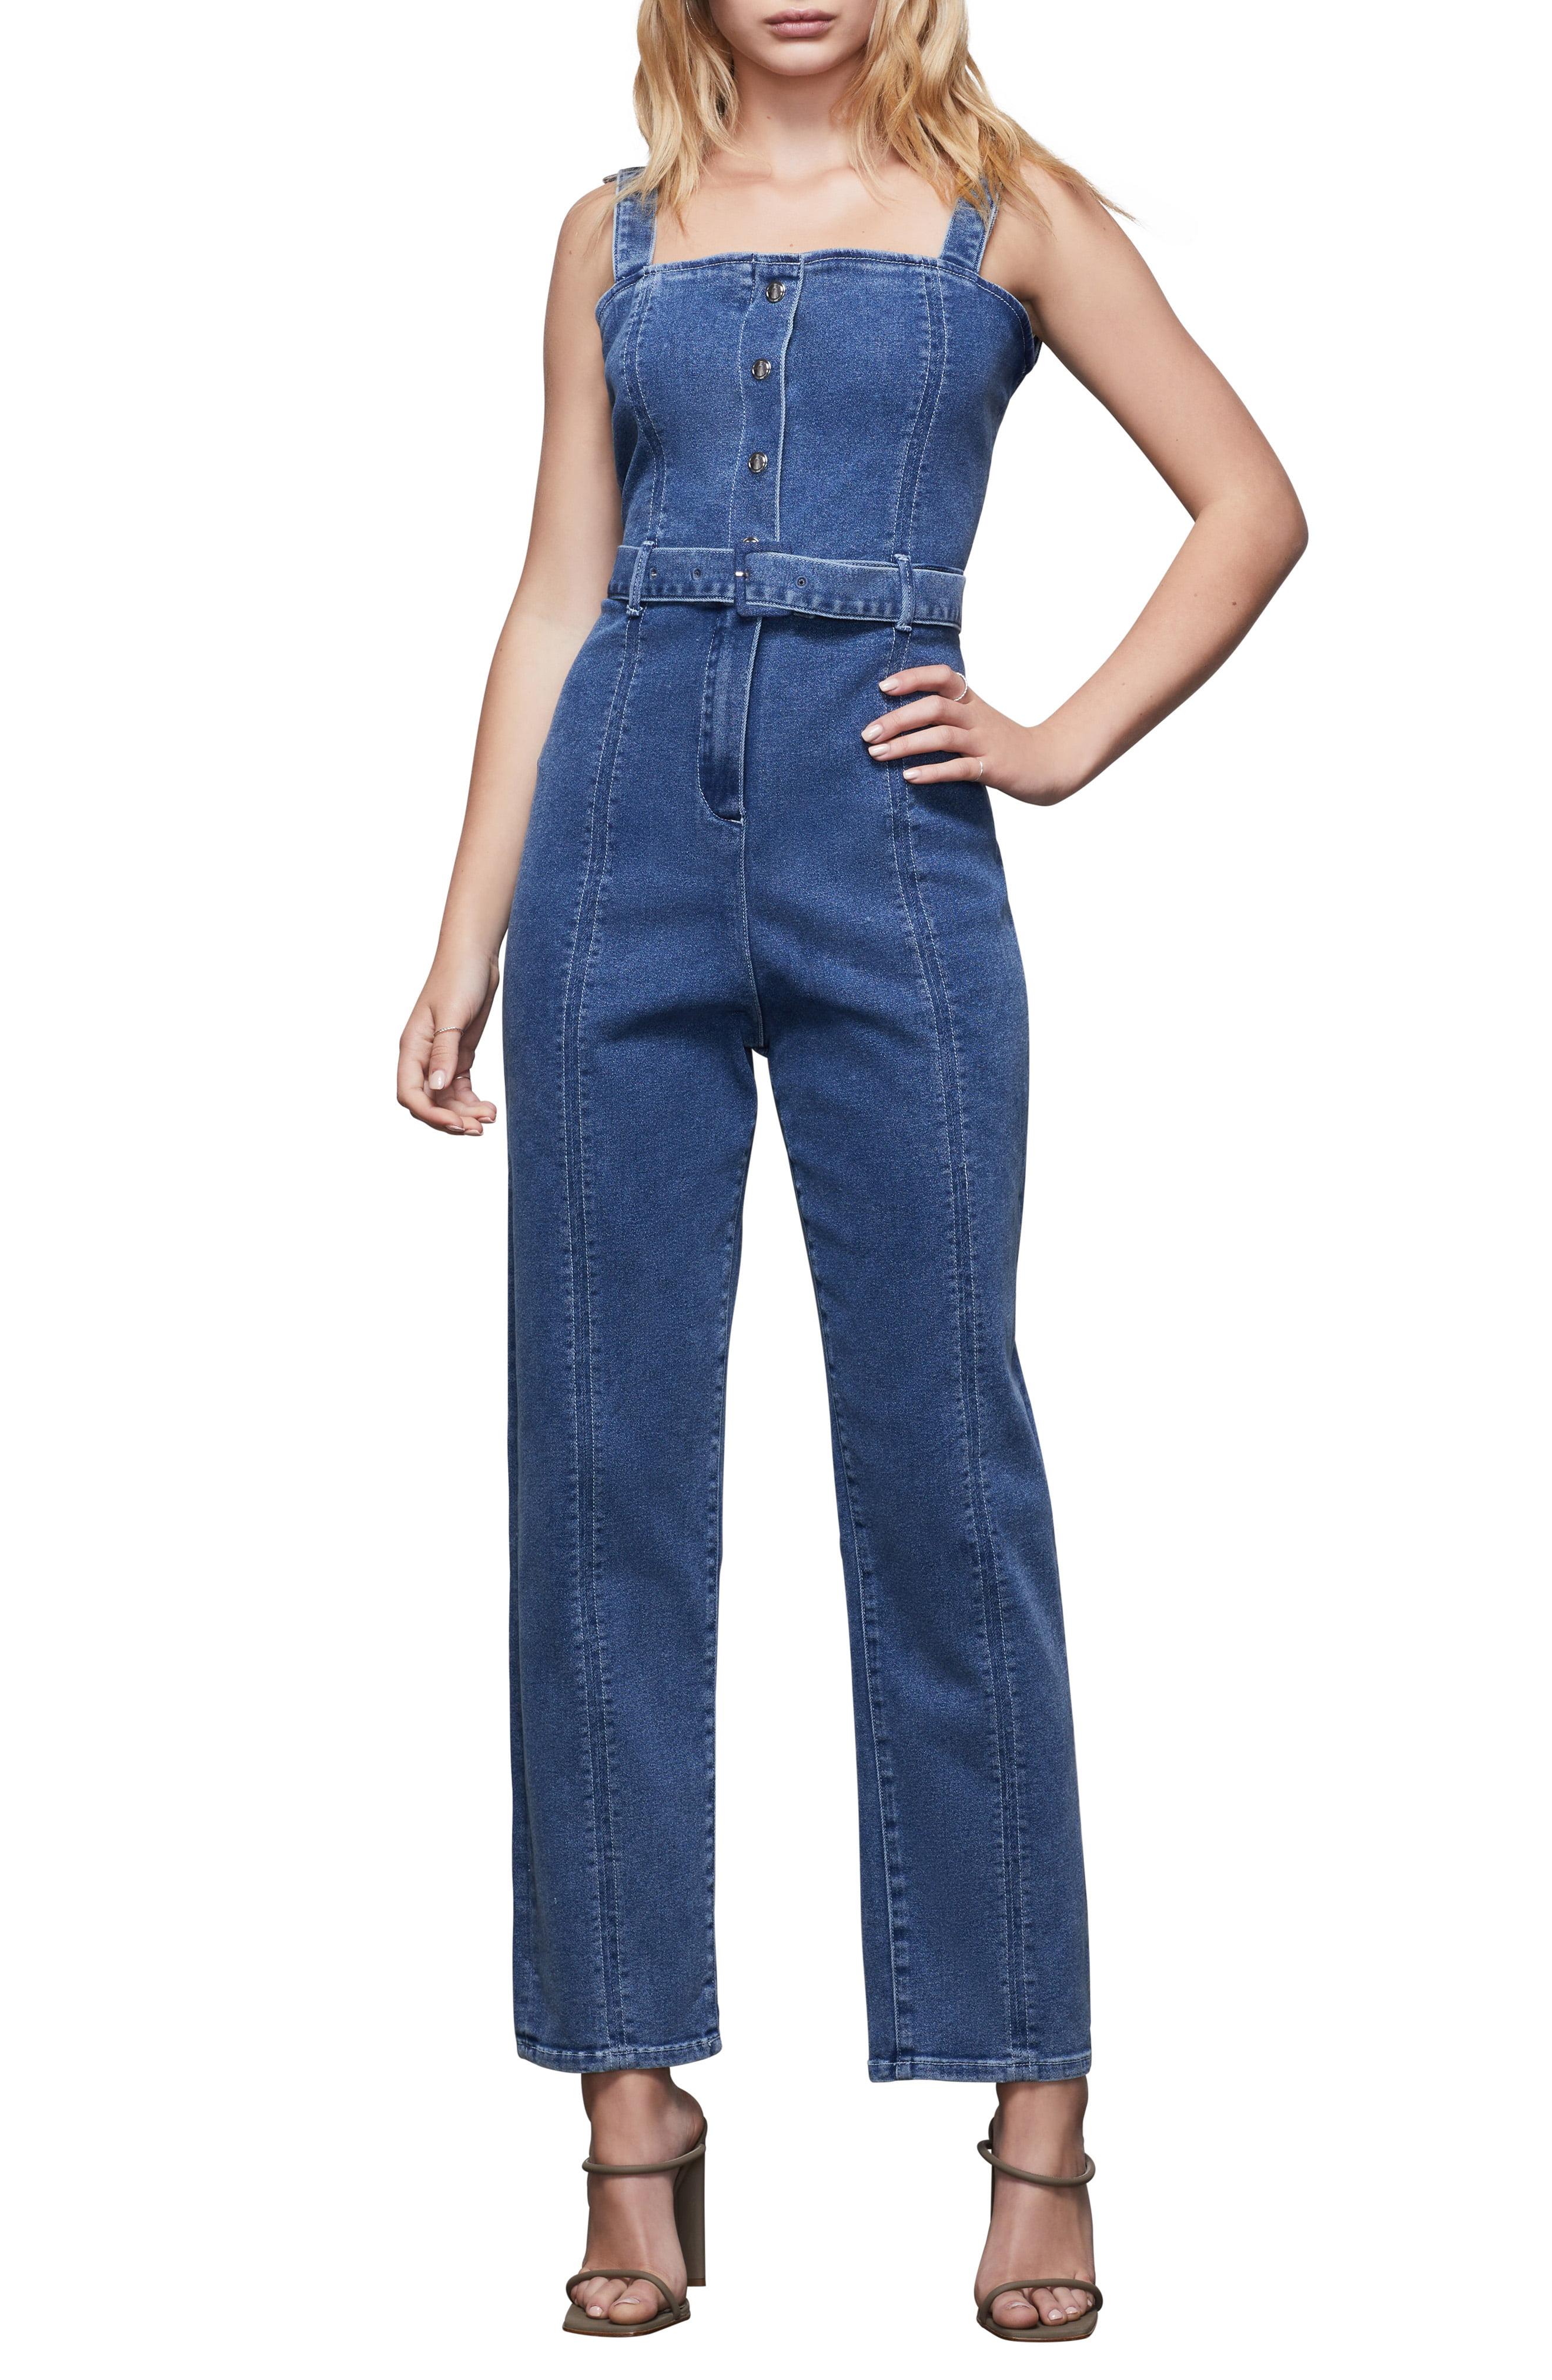 GOOD AMERICAN Denim Belted Sleeveless Jumpsuit in Blue - Lyst